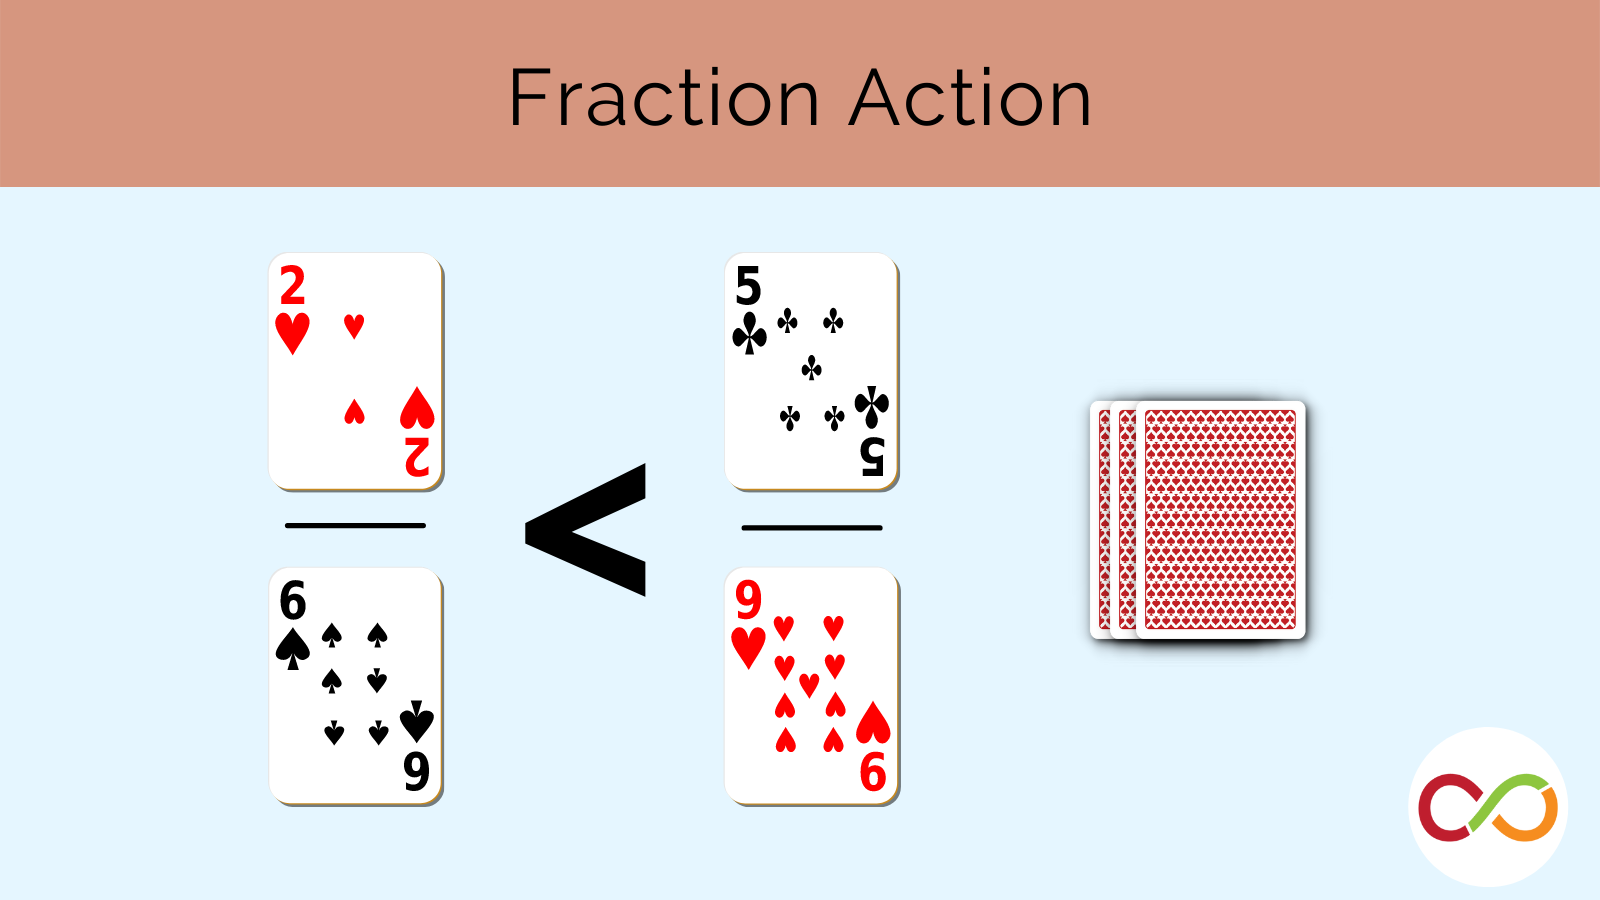 An image linking to the fraction action lesson